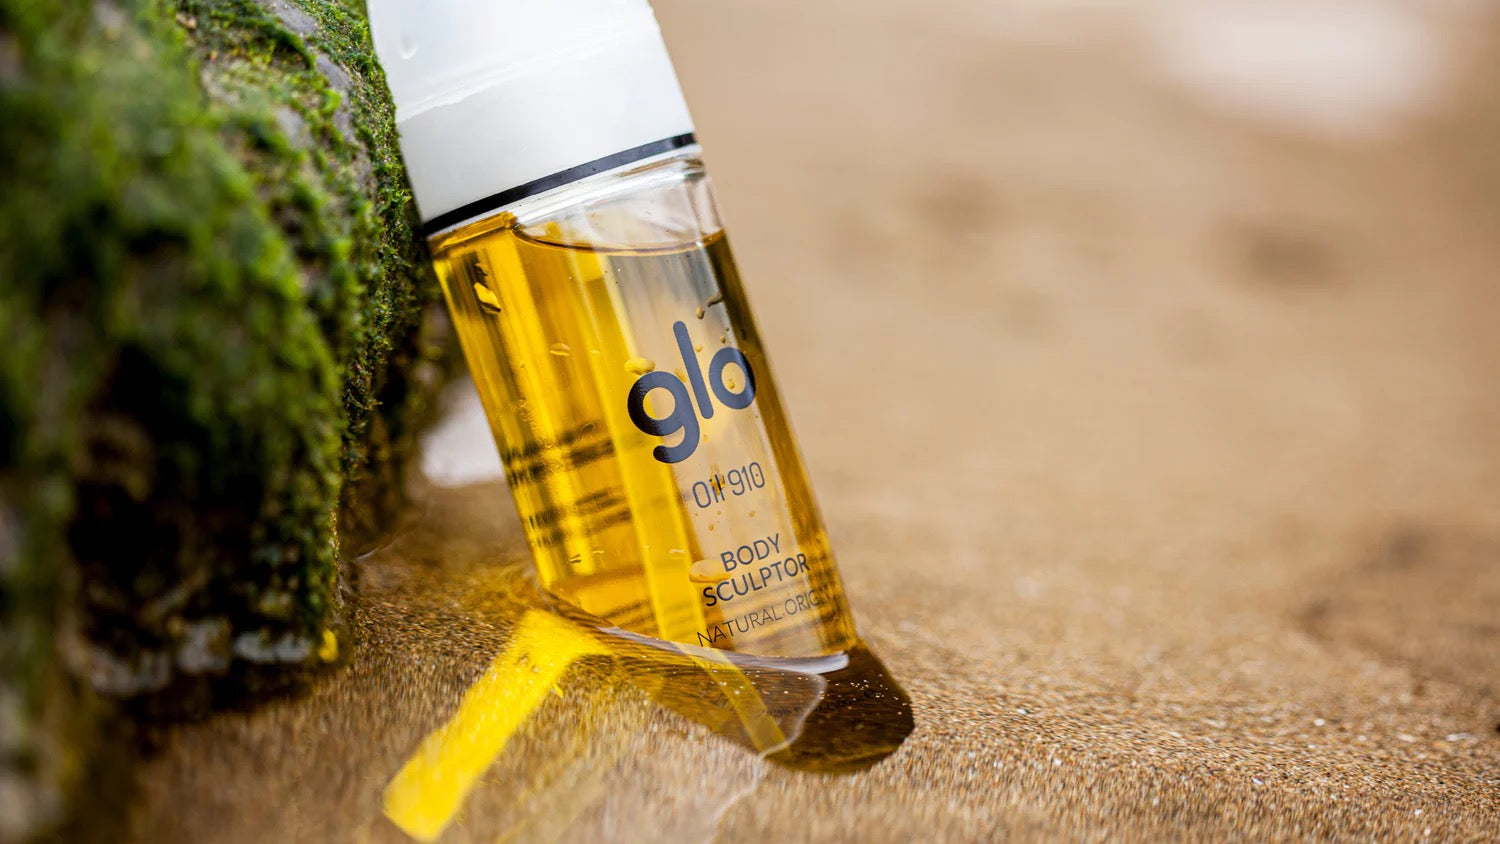 HOW OIL 910 ANTI-CELLULITE OIL WORKS TO IMPROVE YOUR BODY